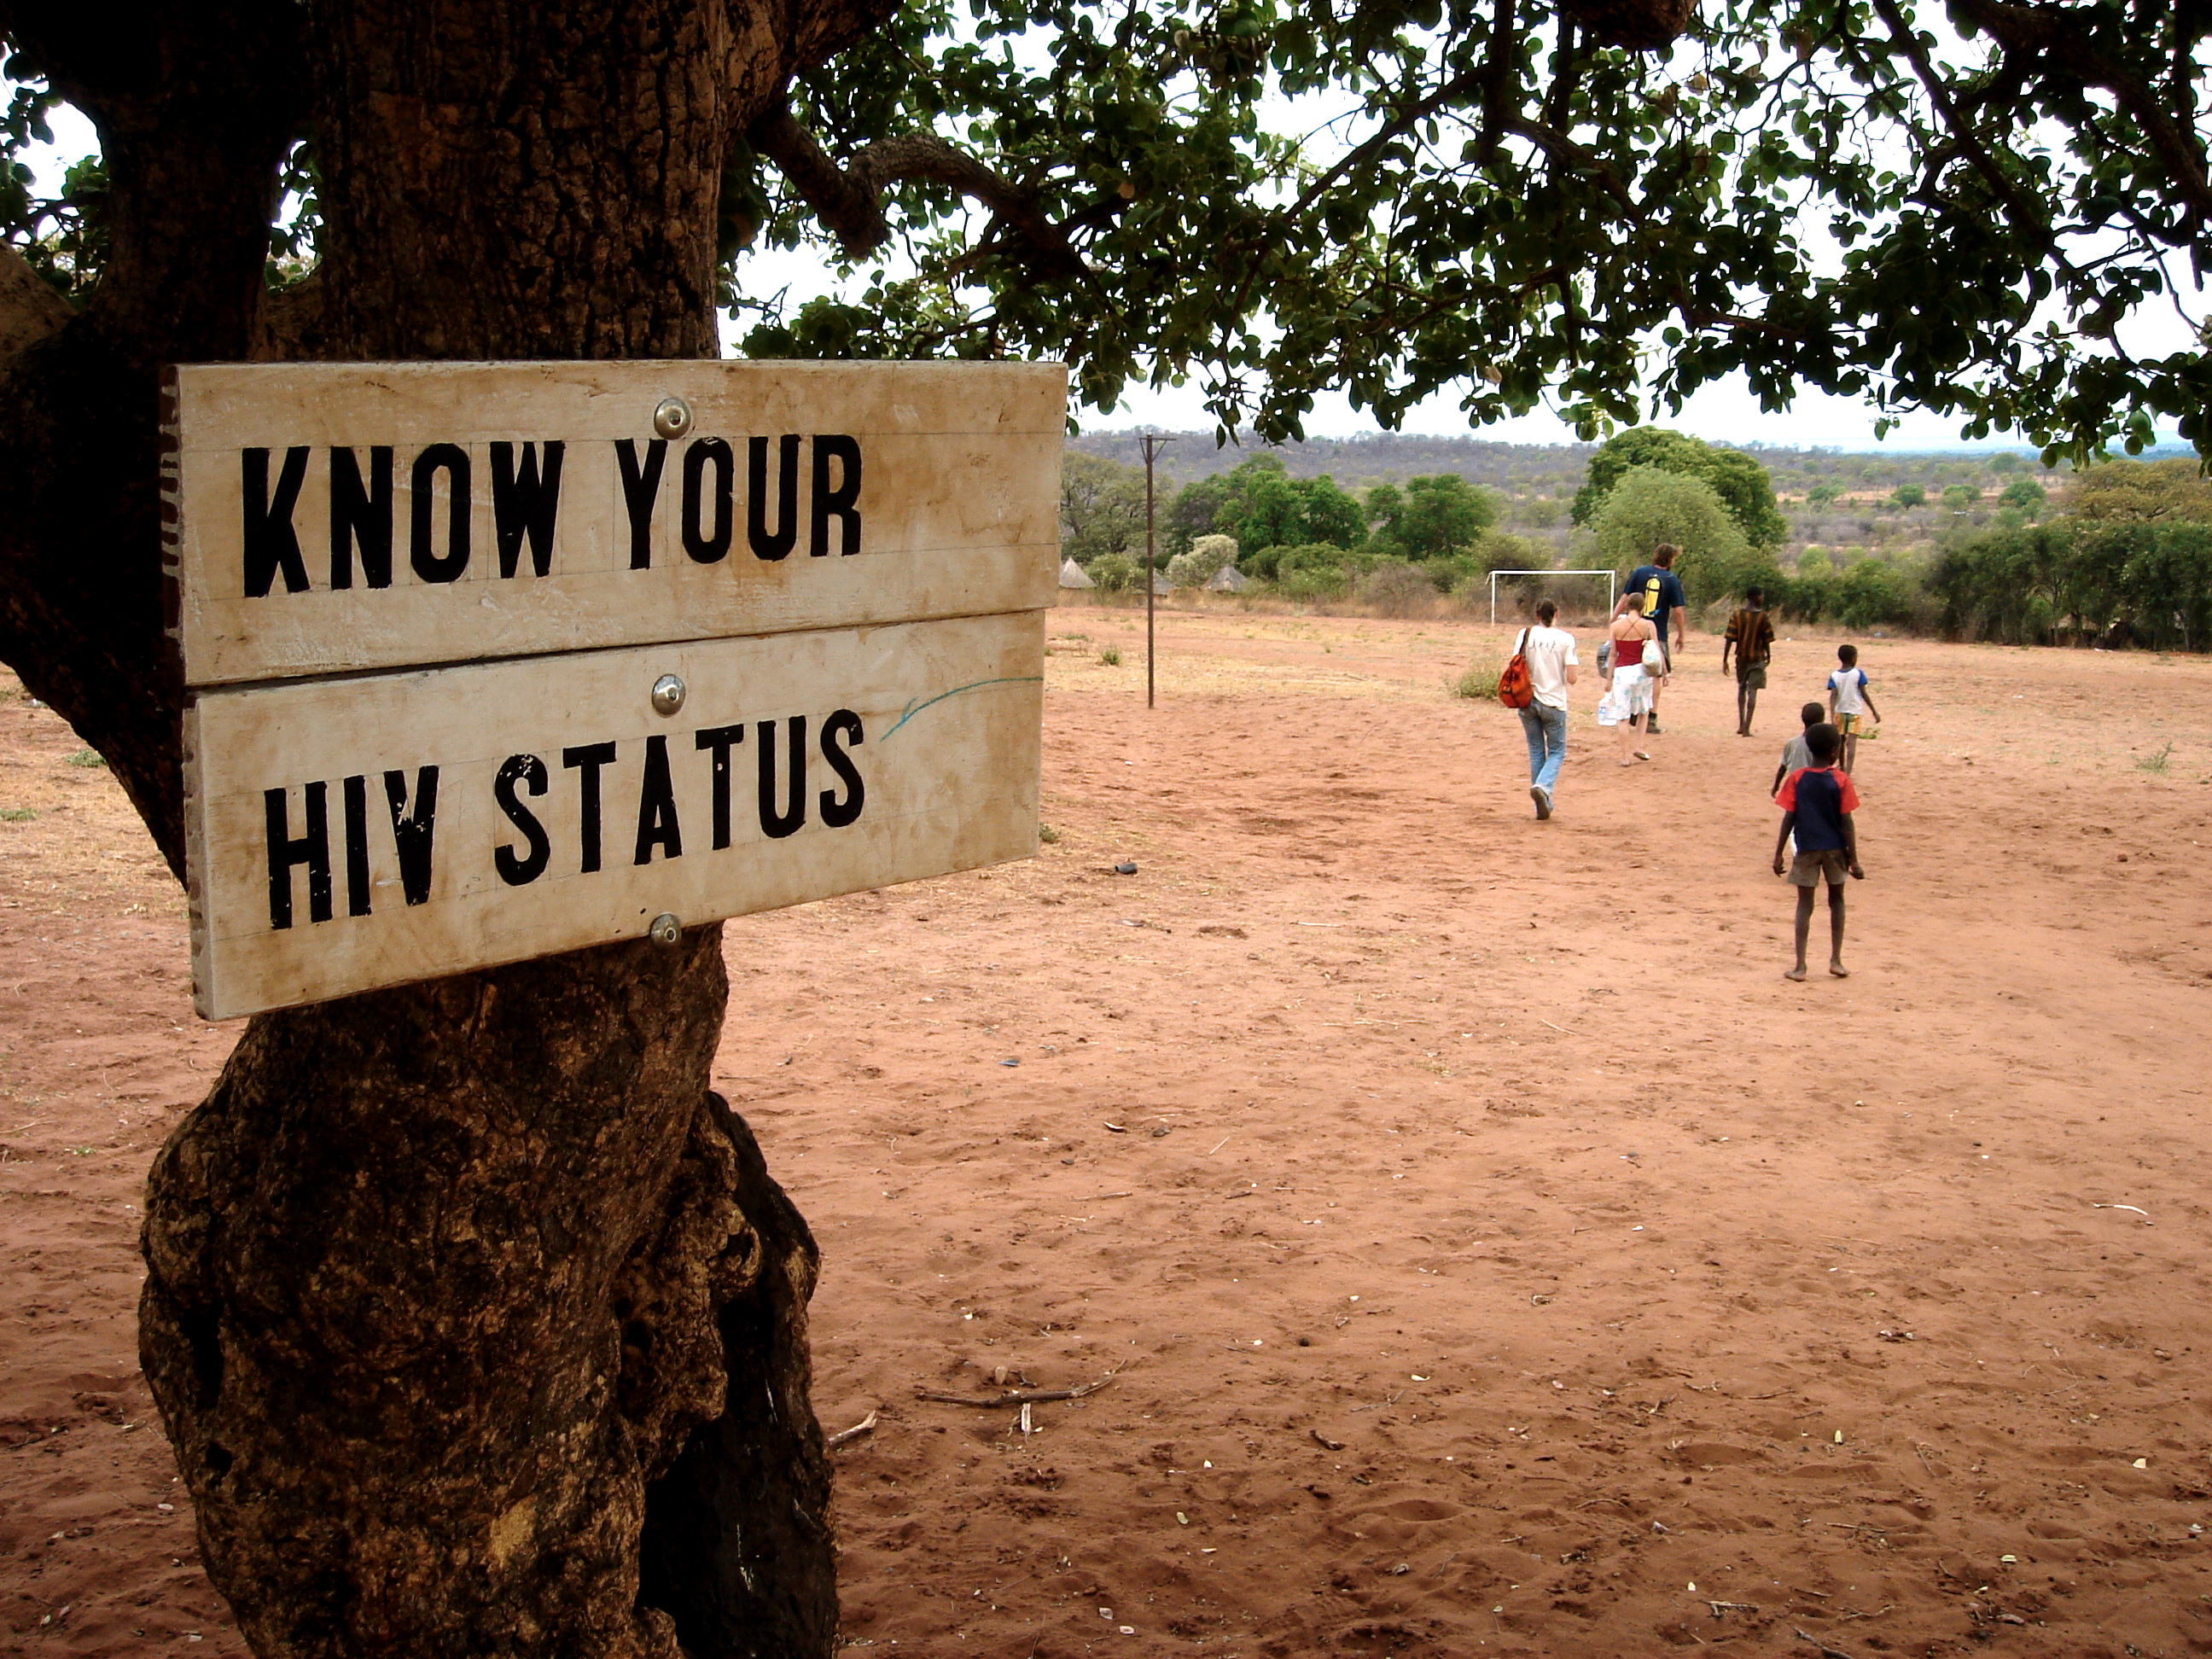 Know your HIV status by Jon Rawlinson (CC BY 2.0) https://www.flickr.com/photos/london/75148497/in/photostream/ https://www.flickr.com/photos/london/ https://creativecommons.org/licenses/by/2.0/